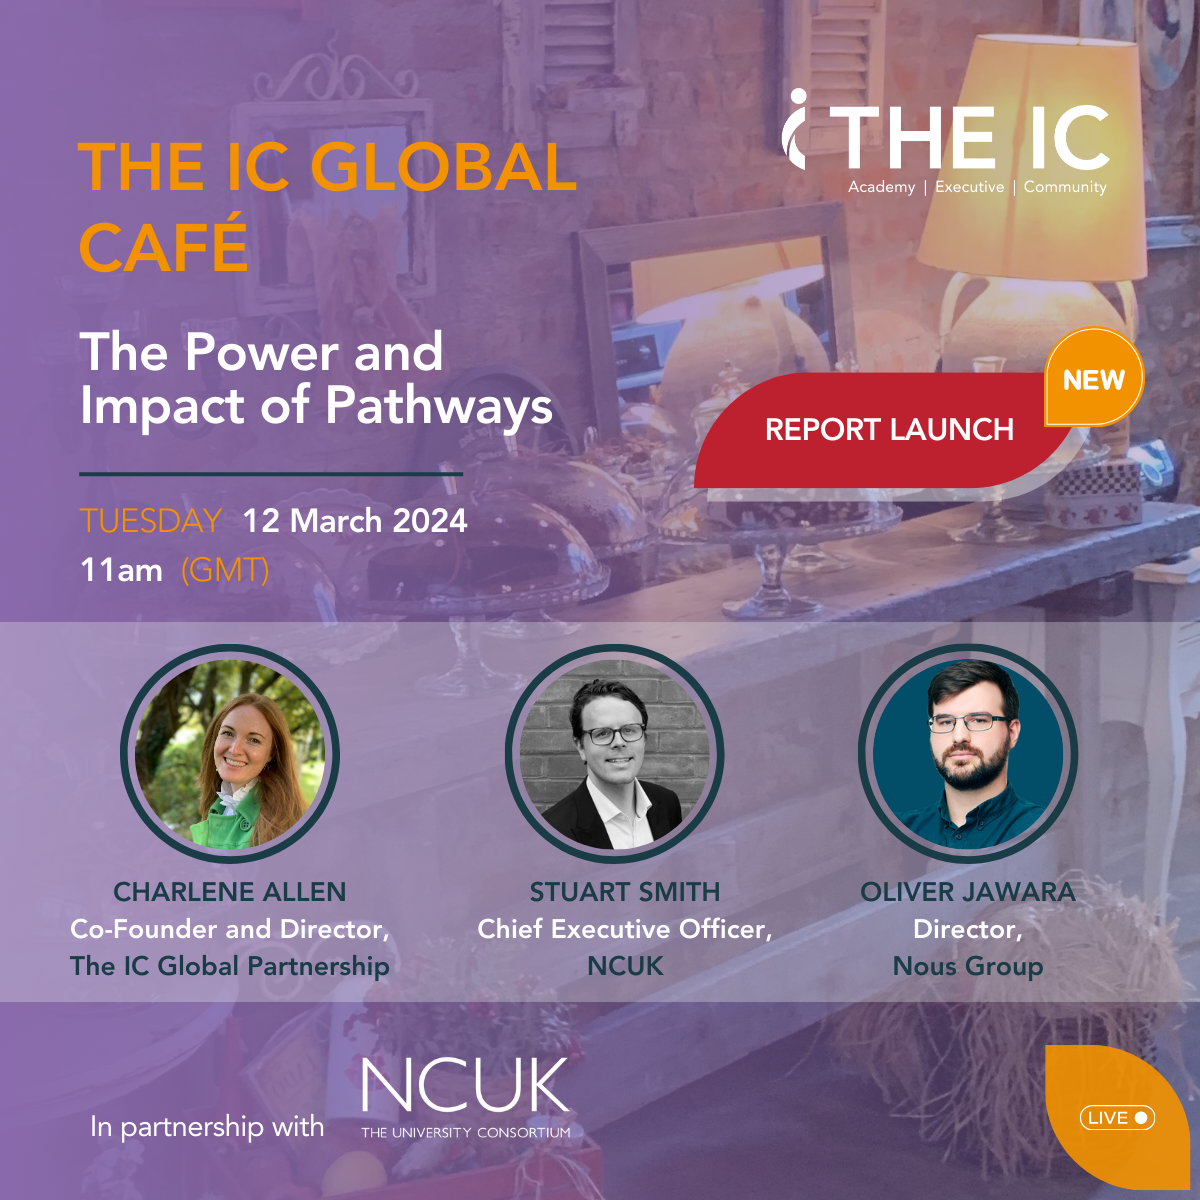 The IC Global Café: The Power and Impact of Pathways